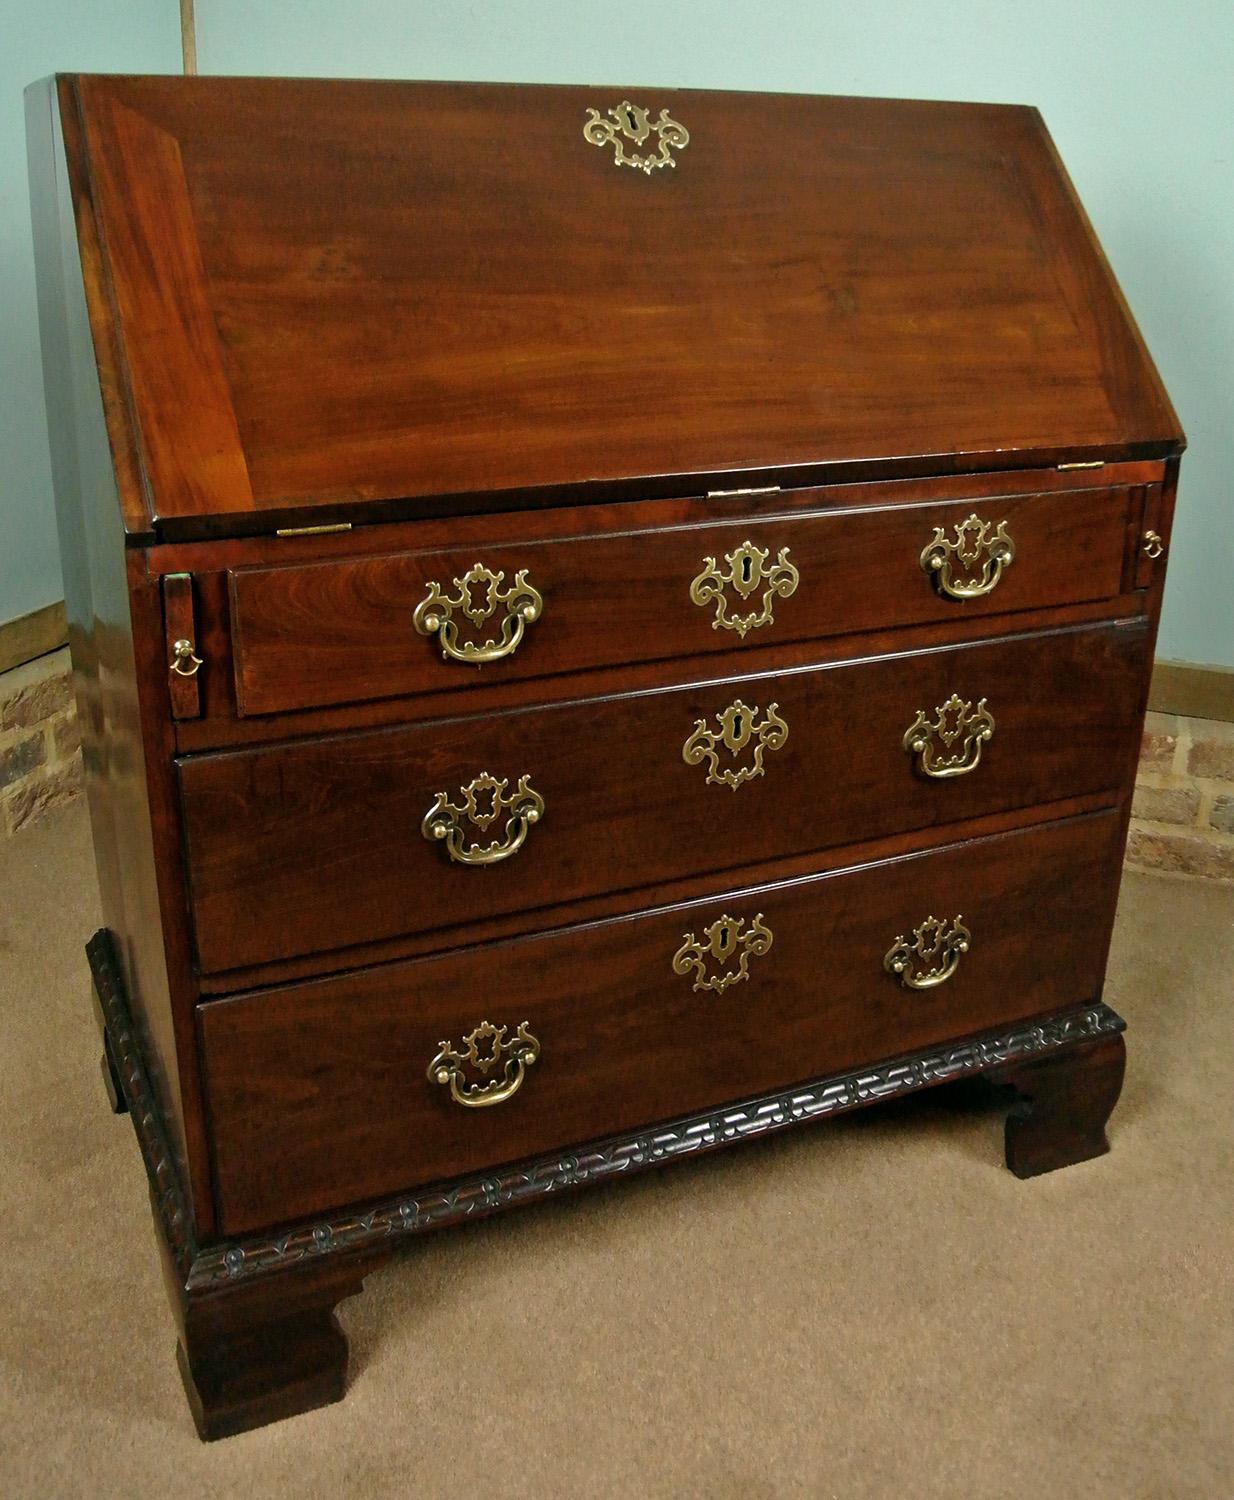 Exceptional Rare and Fine Padouk Wood Bureau in the Chippendale Manner, c. 1780 In Good Condition For Sale In Heathfield, GB